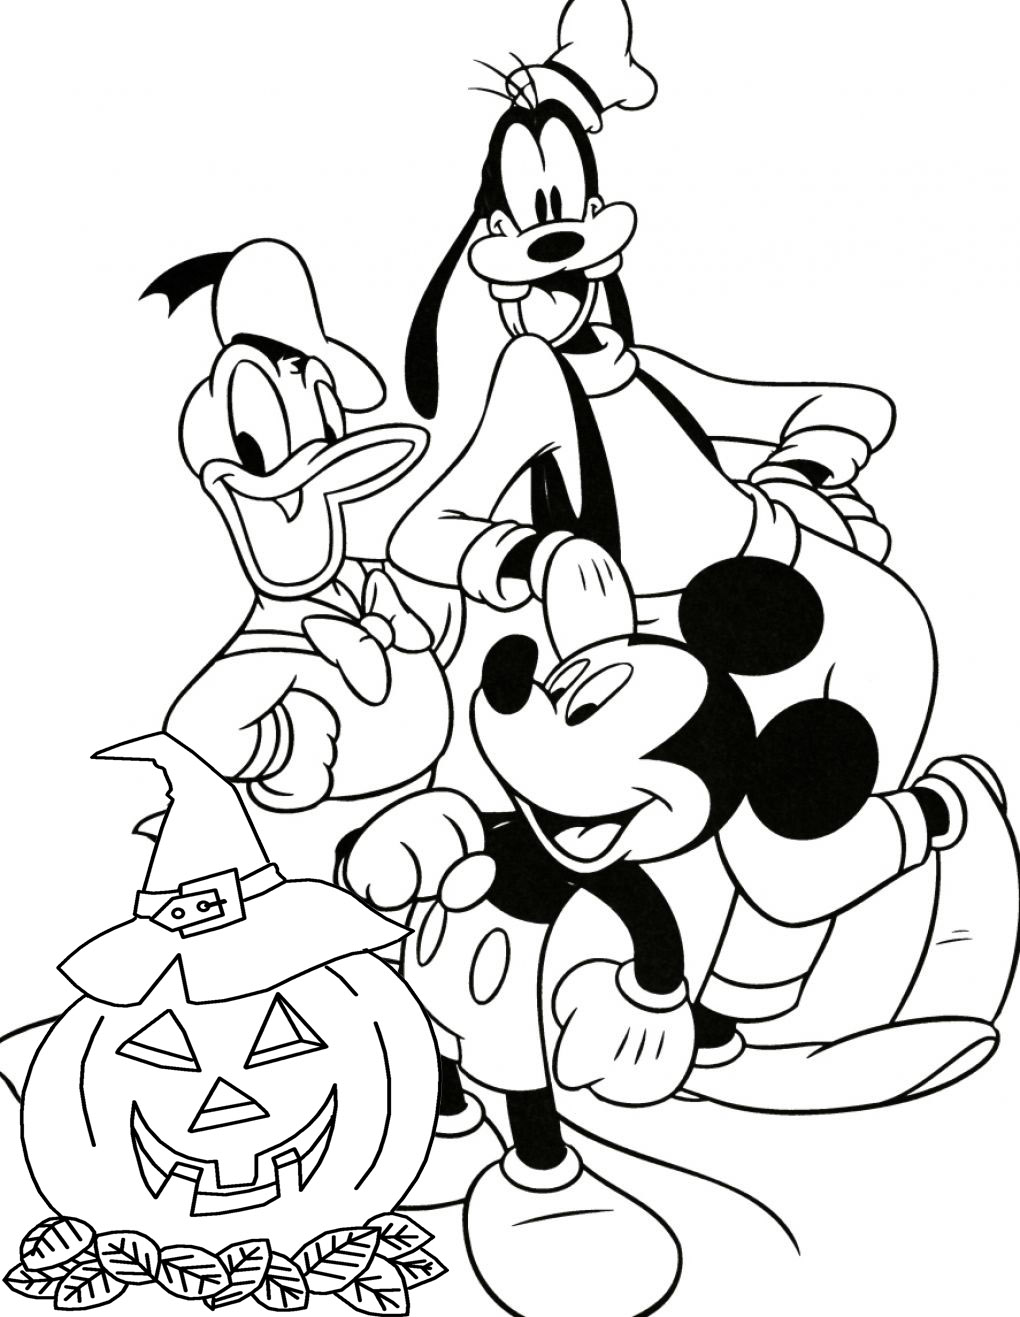  Free Disney Halloween Coloring Pages 7